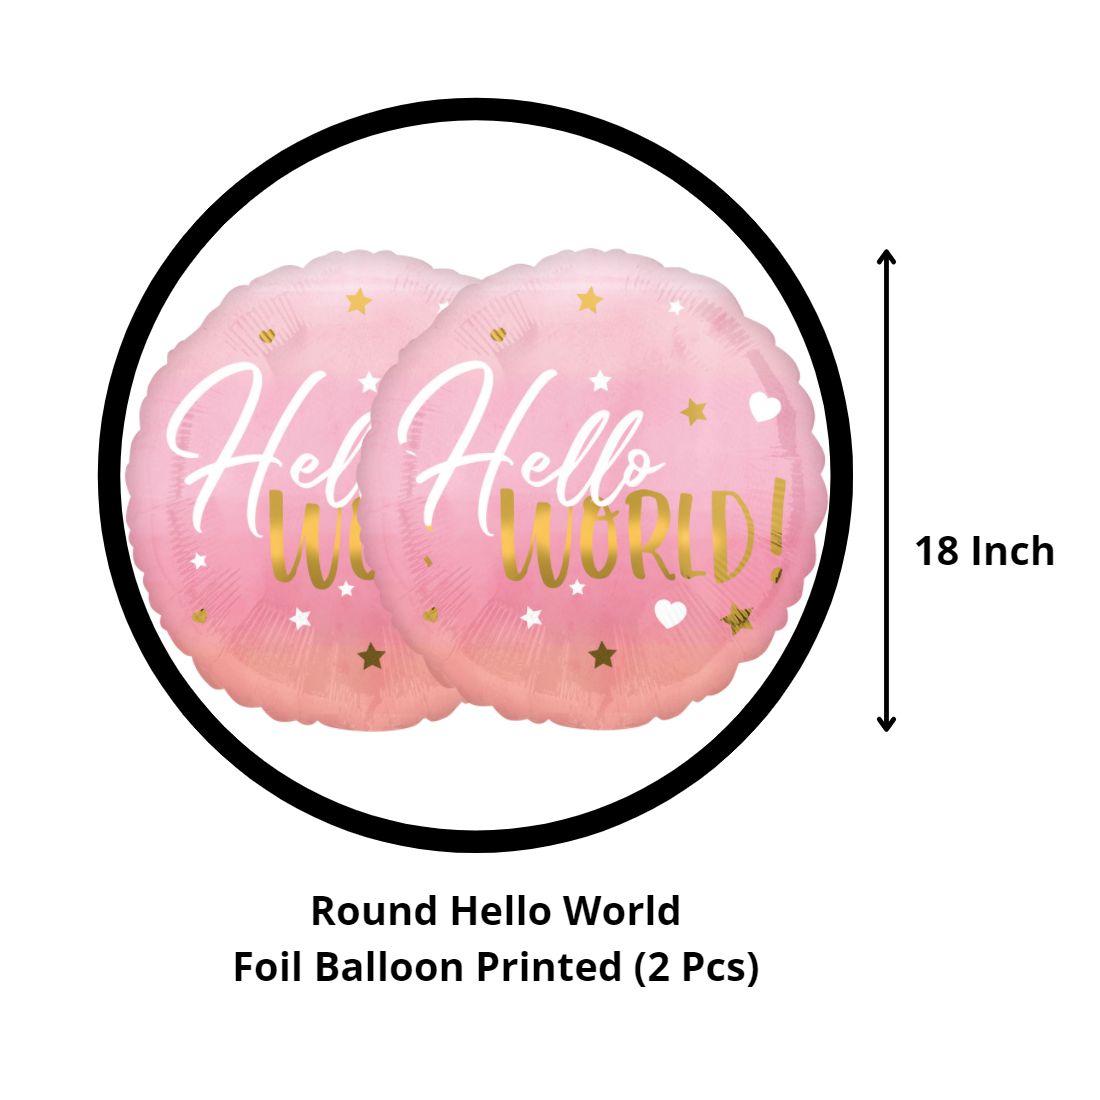 Oh Baby Pink Shower Welcome New Born Baby Decorative Foil Balloon Set of 5